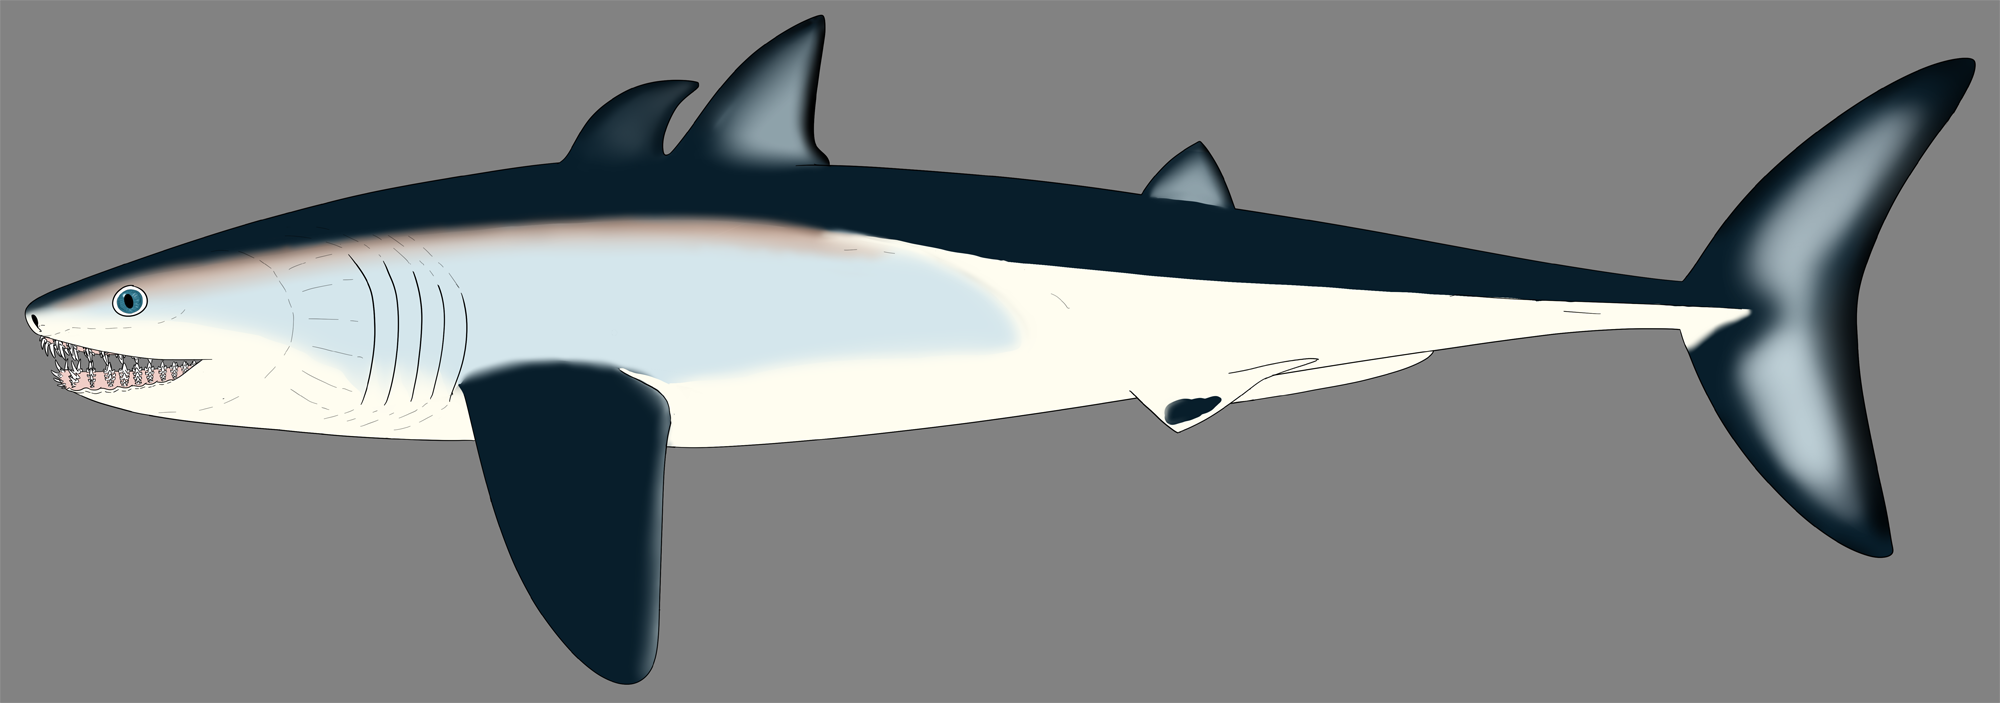 Artist's reconstruction of the Devonian shark Cladoselache from Ohio. The shark is shows from the side. It has an elongated, a nearly symmetrical tail fin that is oriented vertically, three fins on its dorsal side, and a pectoral fin on its lower lateral side, behind the gills. The mouth is near the anterior end of the body.